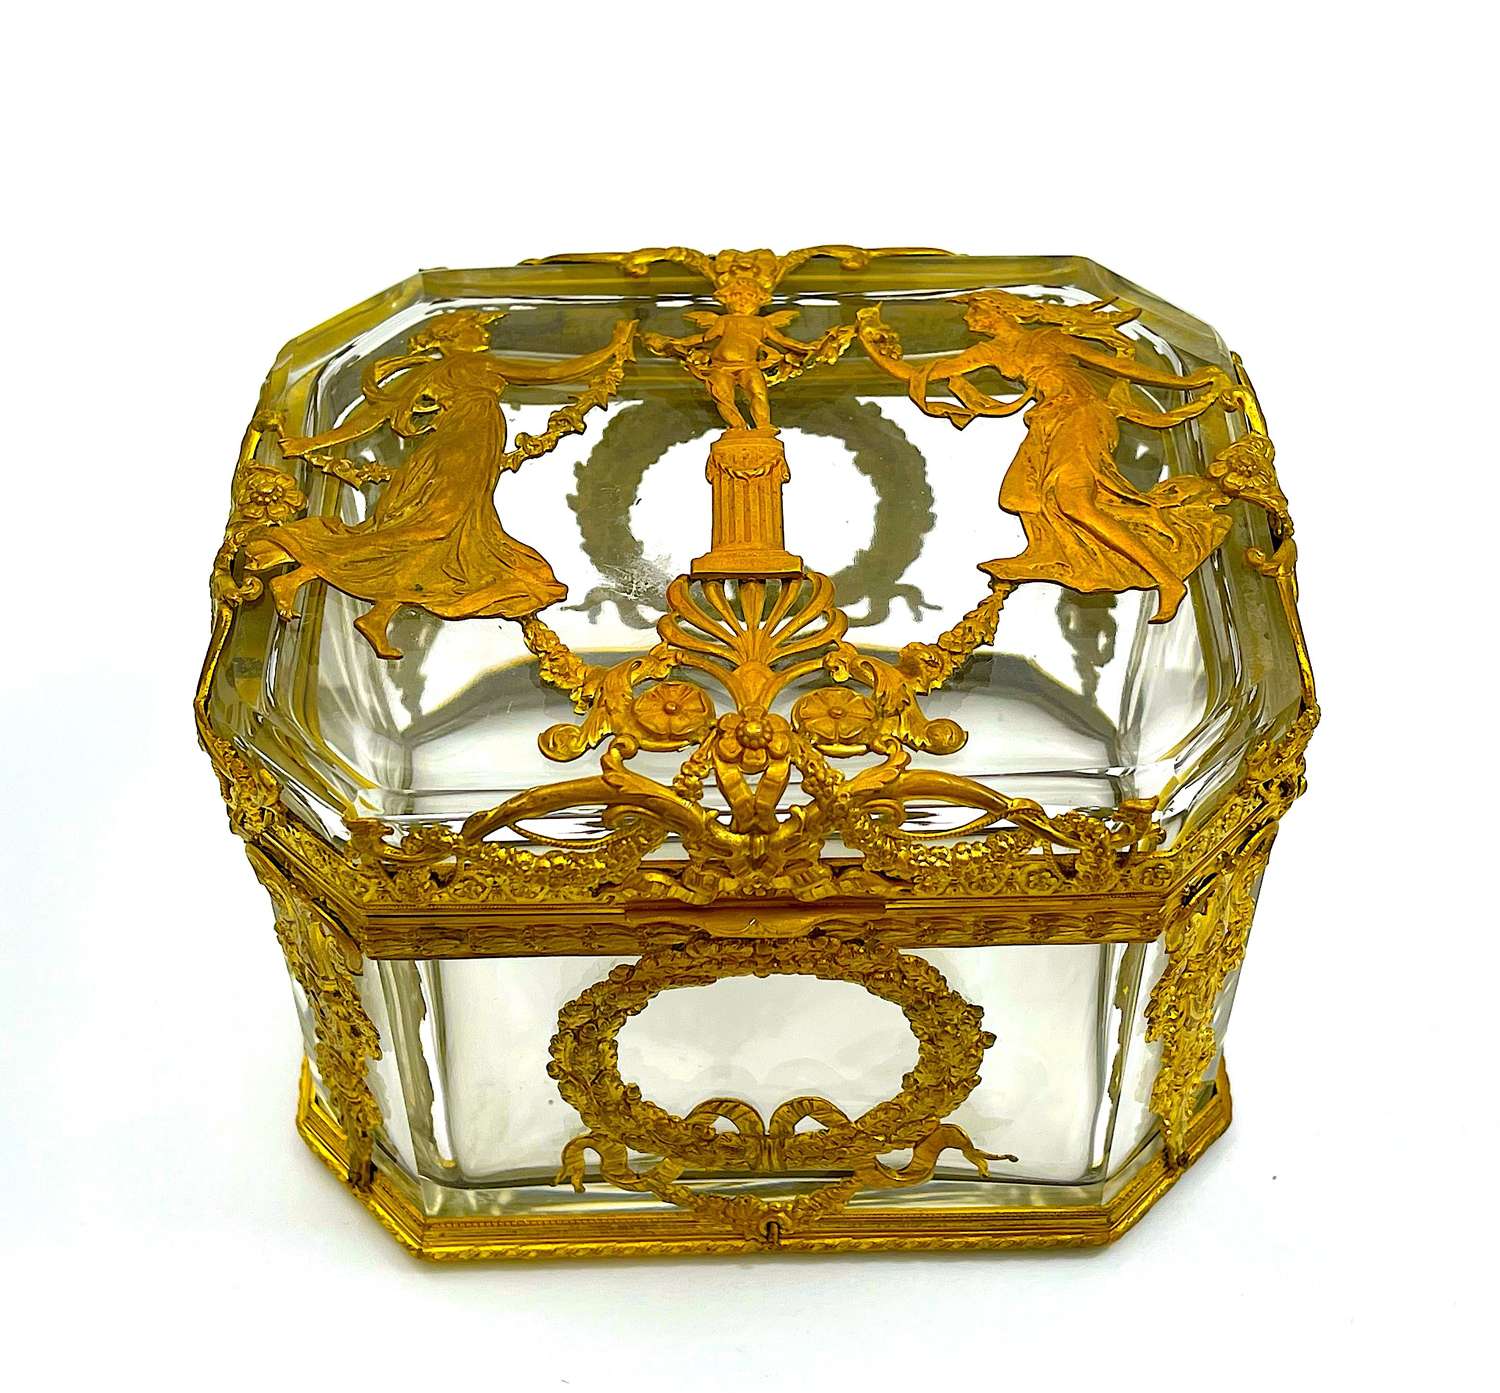 High Quality French Napoleon III Dore Bronze and Crystal Casket.